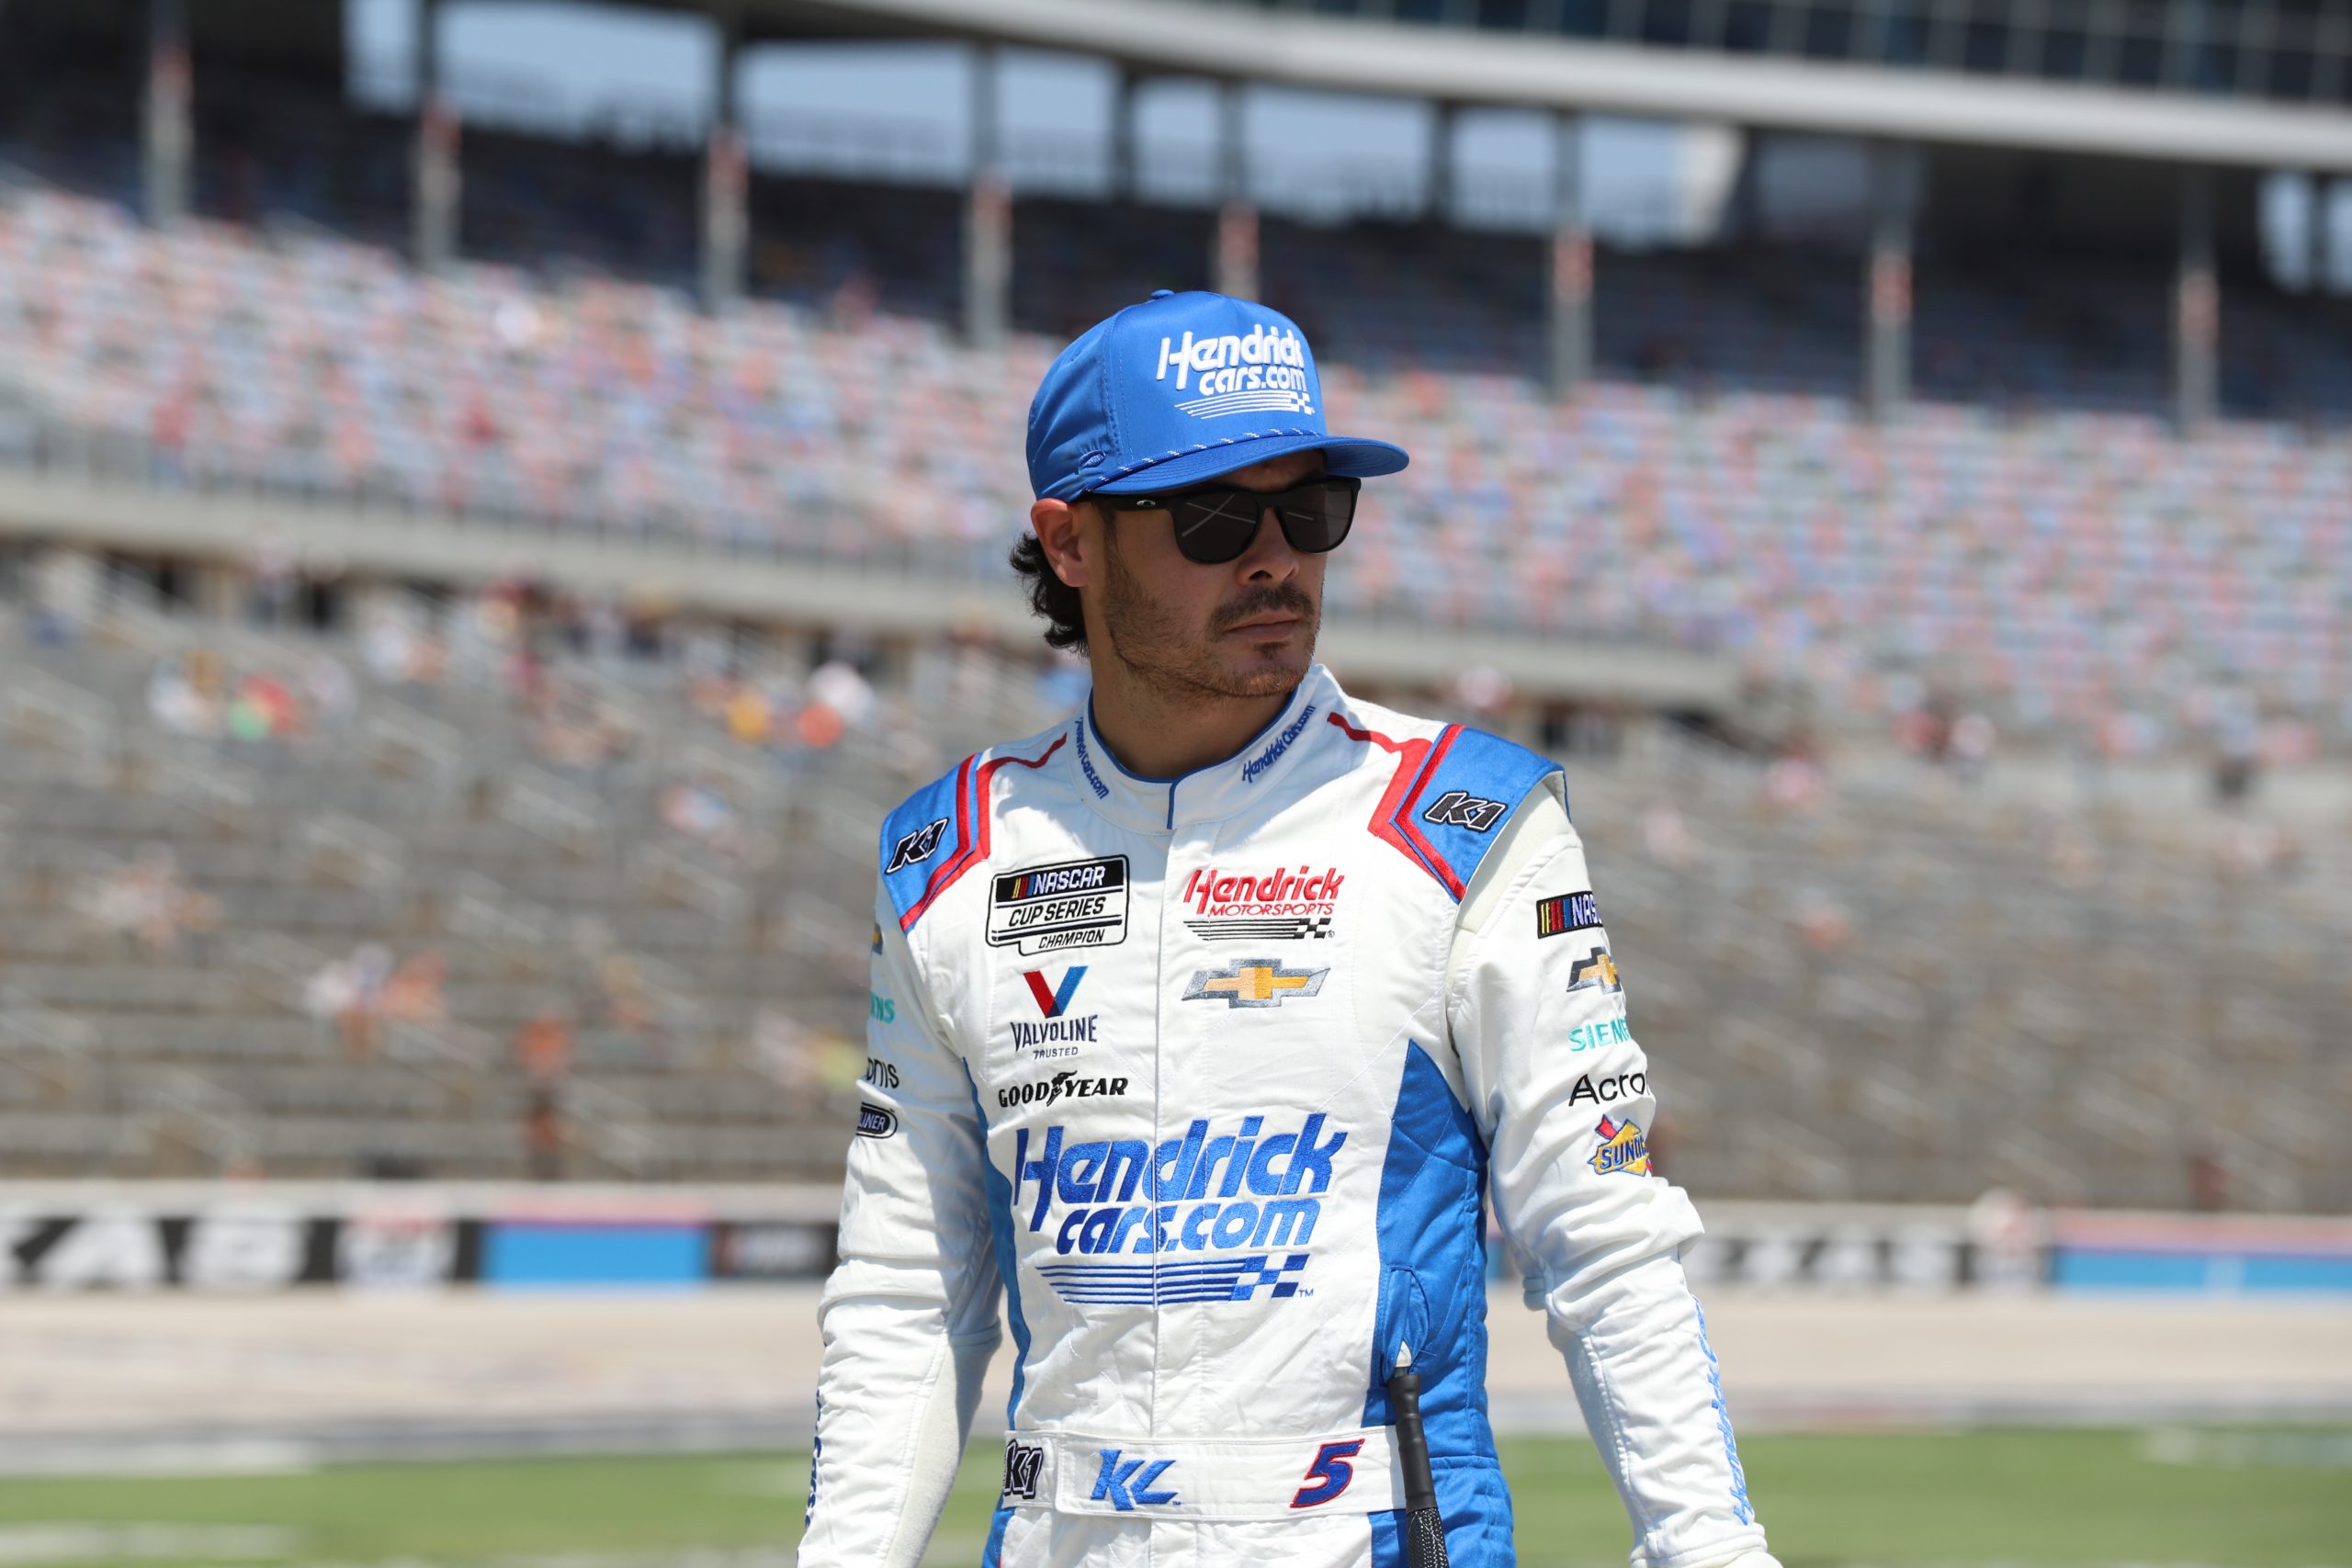 Kyle Larson looks forward to another race day at Texas. (Photo: Dylan Nadwodny | The Podium Finish)